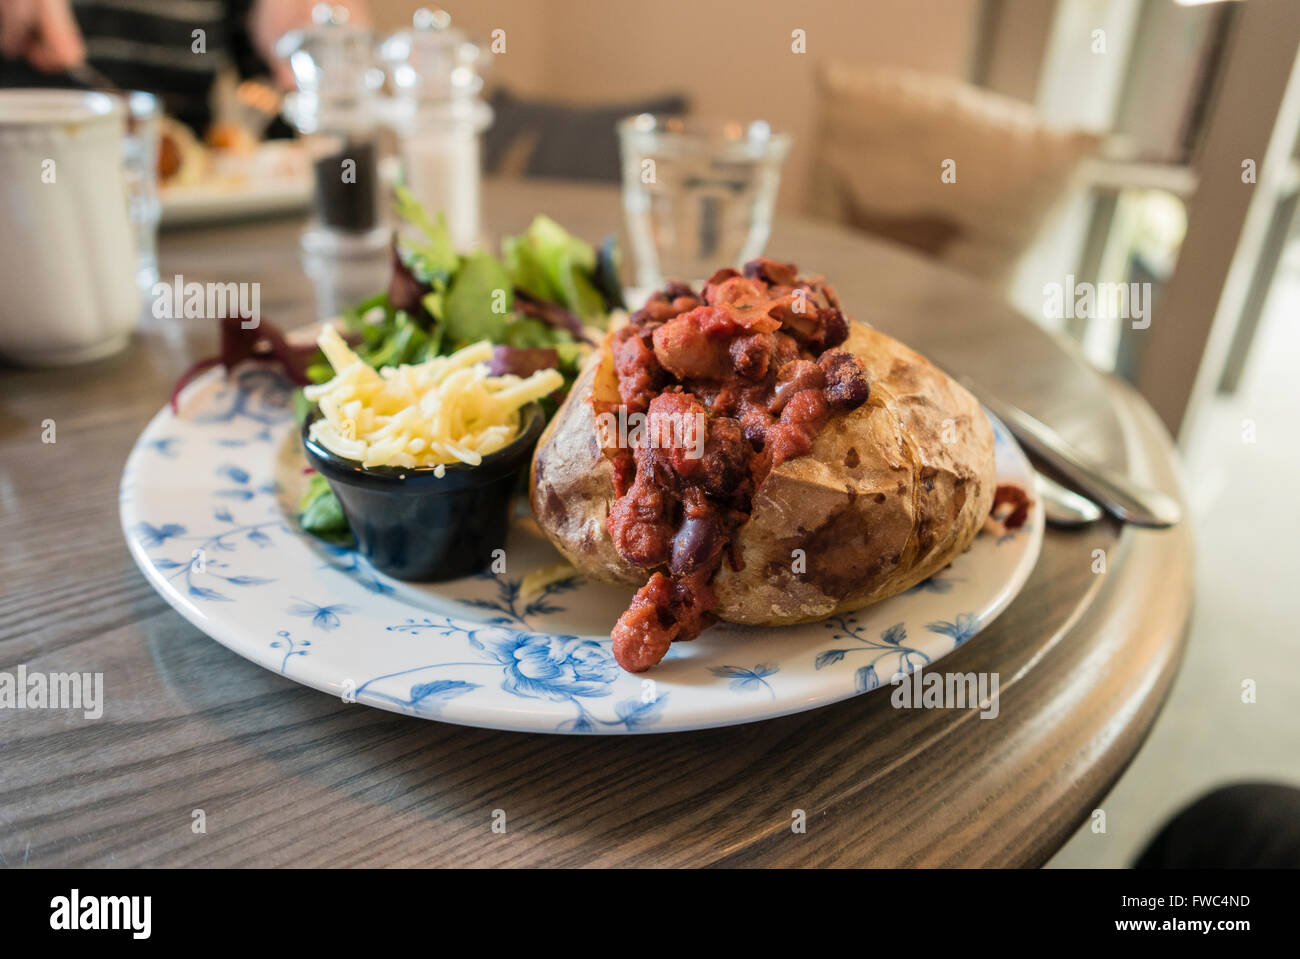 Vegetarian chili-con-carne on a baked jacket potato with vegan cheese and salad in a cafe. Stock Photo